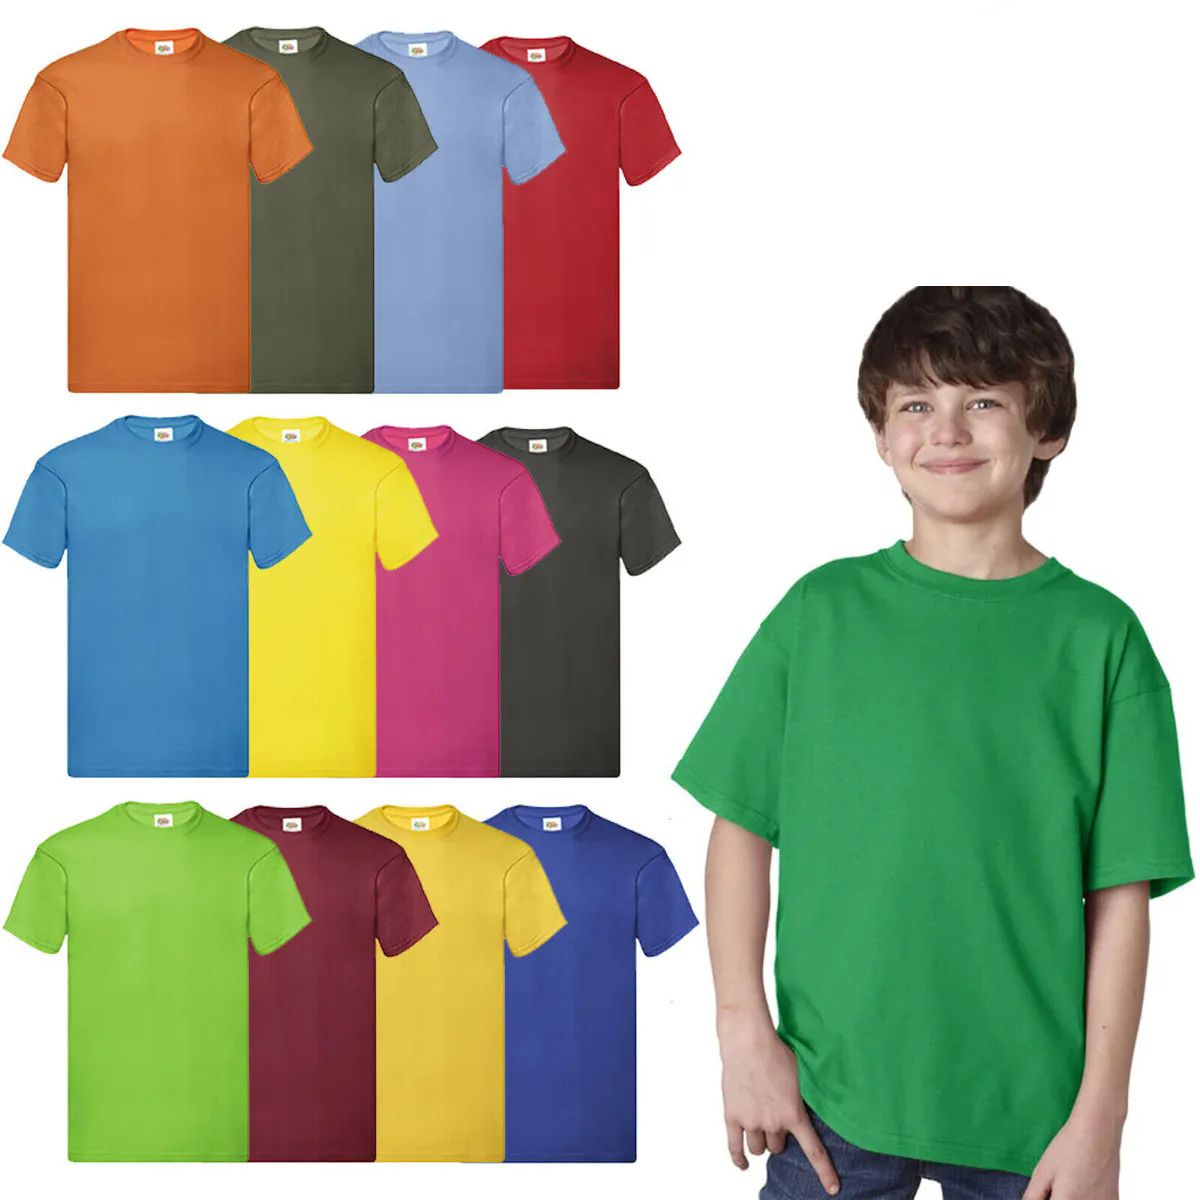 72 Pieces of Billion Hats Kids Youth Cotton Assorted Colors T Shirts Size S